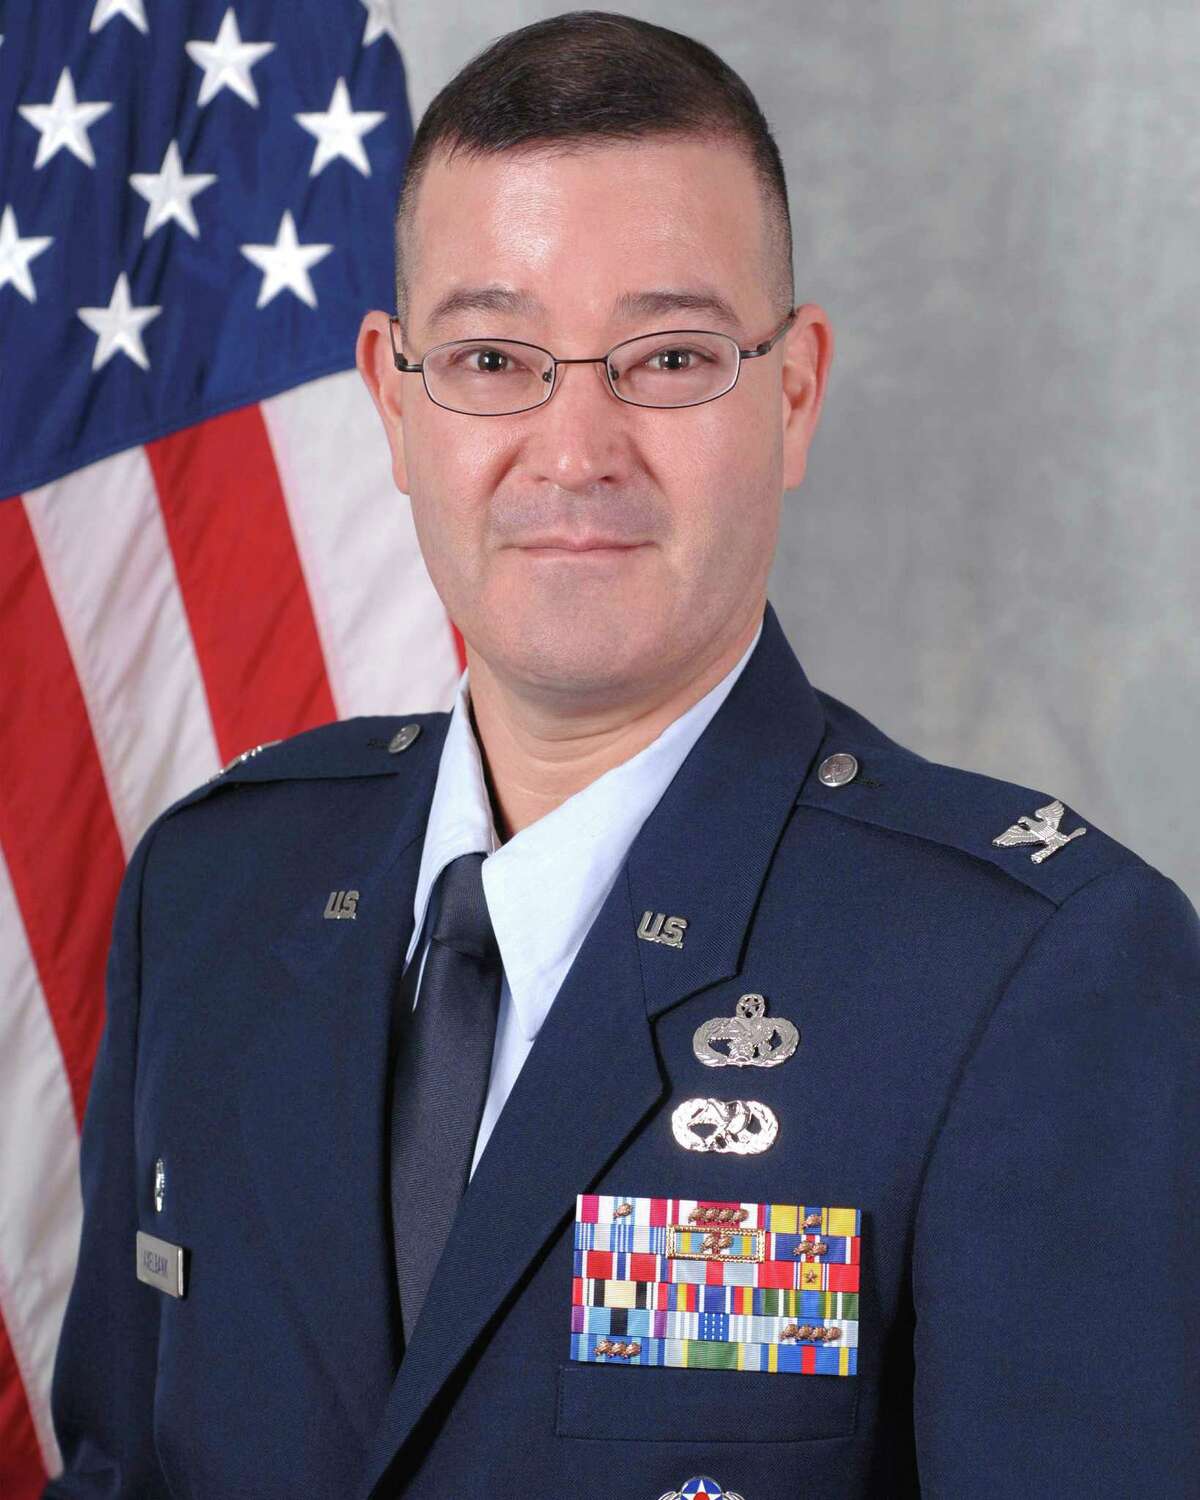 Col. Eric Axelbank, seen in an undated USAF courtesy photo accessed Tuesday Sept. 4, 2012, is a 1990 distinguished graduate of the Air Force ROTC program and a 2003 distinguished graduate of the Air Command and Staff College, according to his published bio. A career Logistics Readiness Officer, he has served in a broad range of logistics readiness, aircraft maintenance and personnel assignments at the joint, headquarters Air Force, center and wing levels. The 37th Training Wing is Colonel Axelbank's fourth command position, having commanded three times prior within the U.S. Air Forces in Europe and the Pacific Air Forces theaters. Before arriving at Lackland Air Force Base, Texas, Colonel Axelbank served as the Vice Commander, 65th Air Base Wing, Lajes Field, Azores, Portugal.